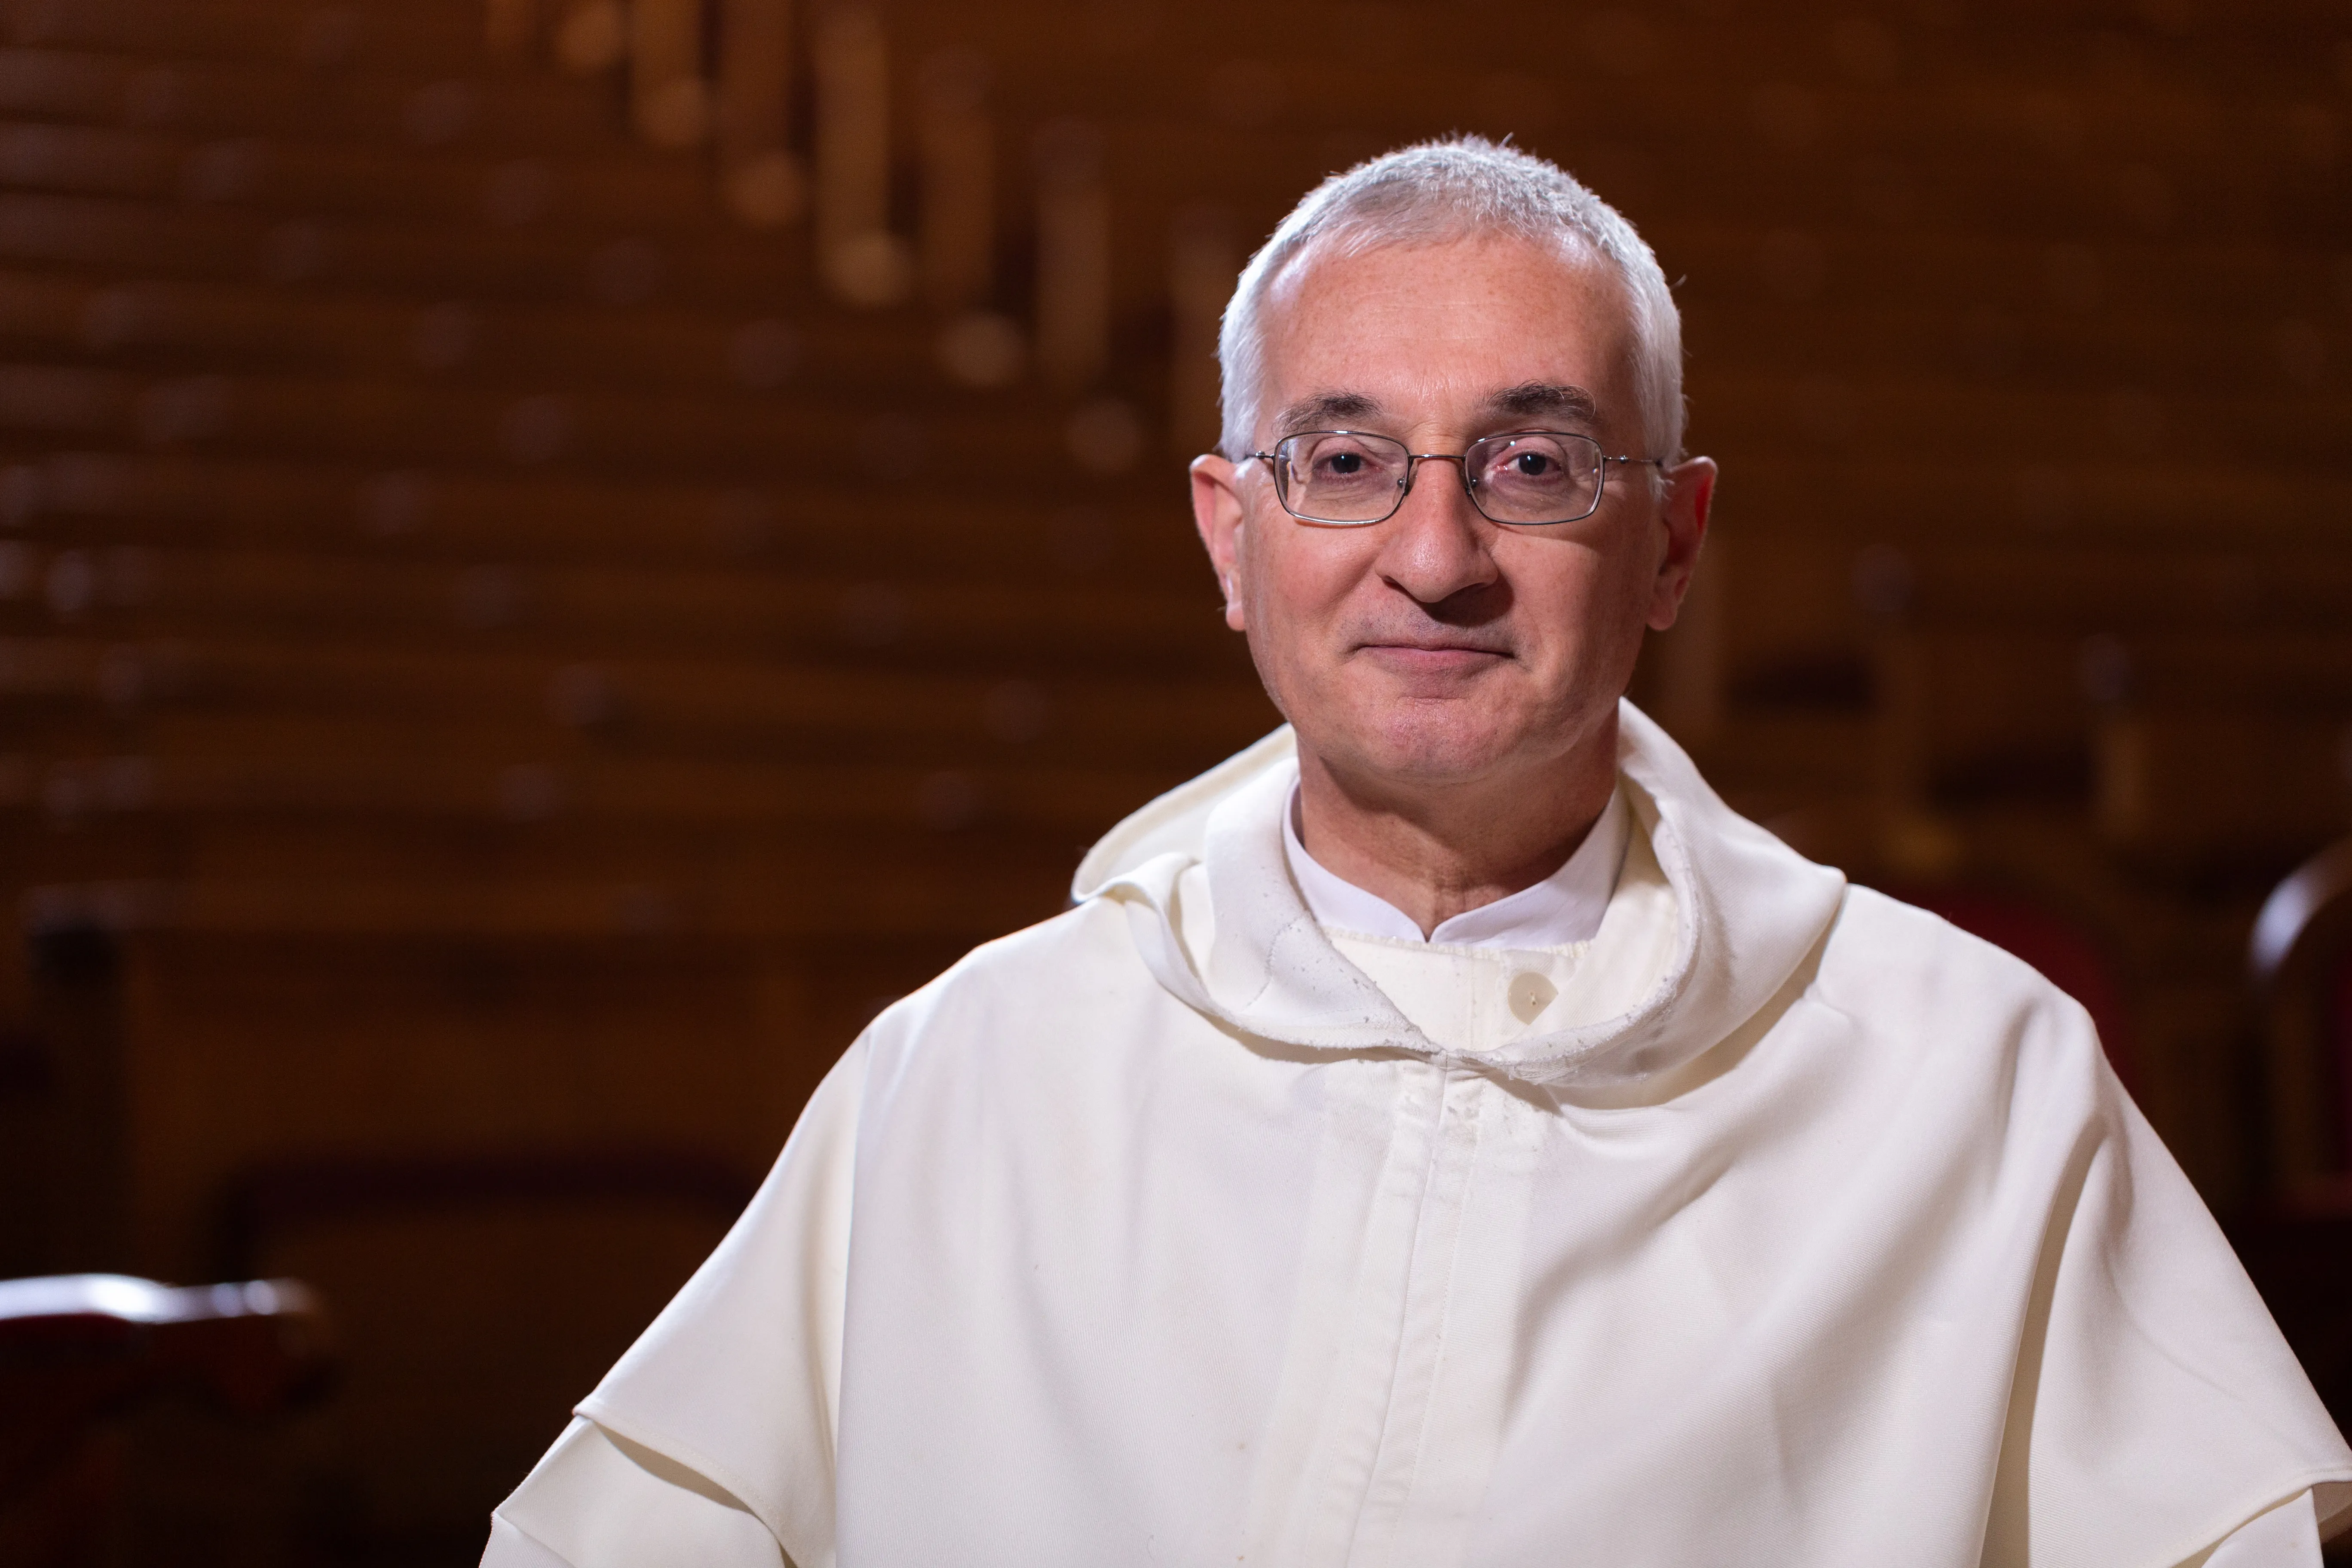 Father Serge-Thomas Bonino, O.P., president of the Pontifical Academy of St. Thomas Aquinas, is also a philosophy professor at the Angelicum in Rome. Credit: Bénédicte Cedergren/EWTN